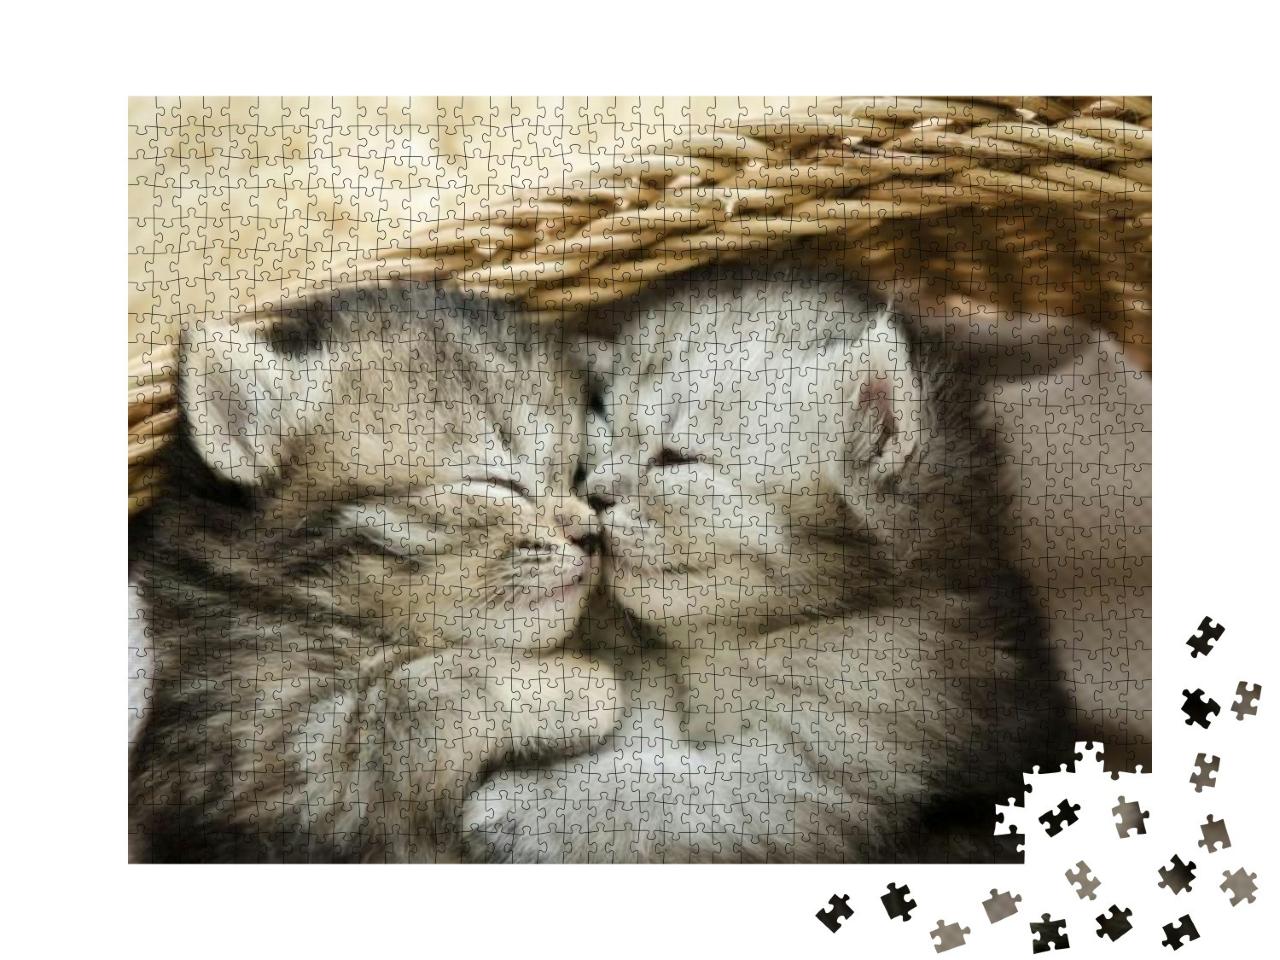 Cute Tabby Kittens Sleeping & Hugging in a Basket... Jigsaw Puzzle with 1000 pieces